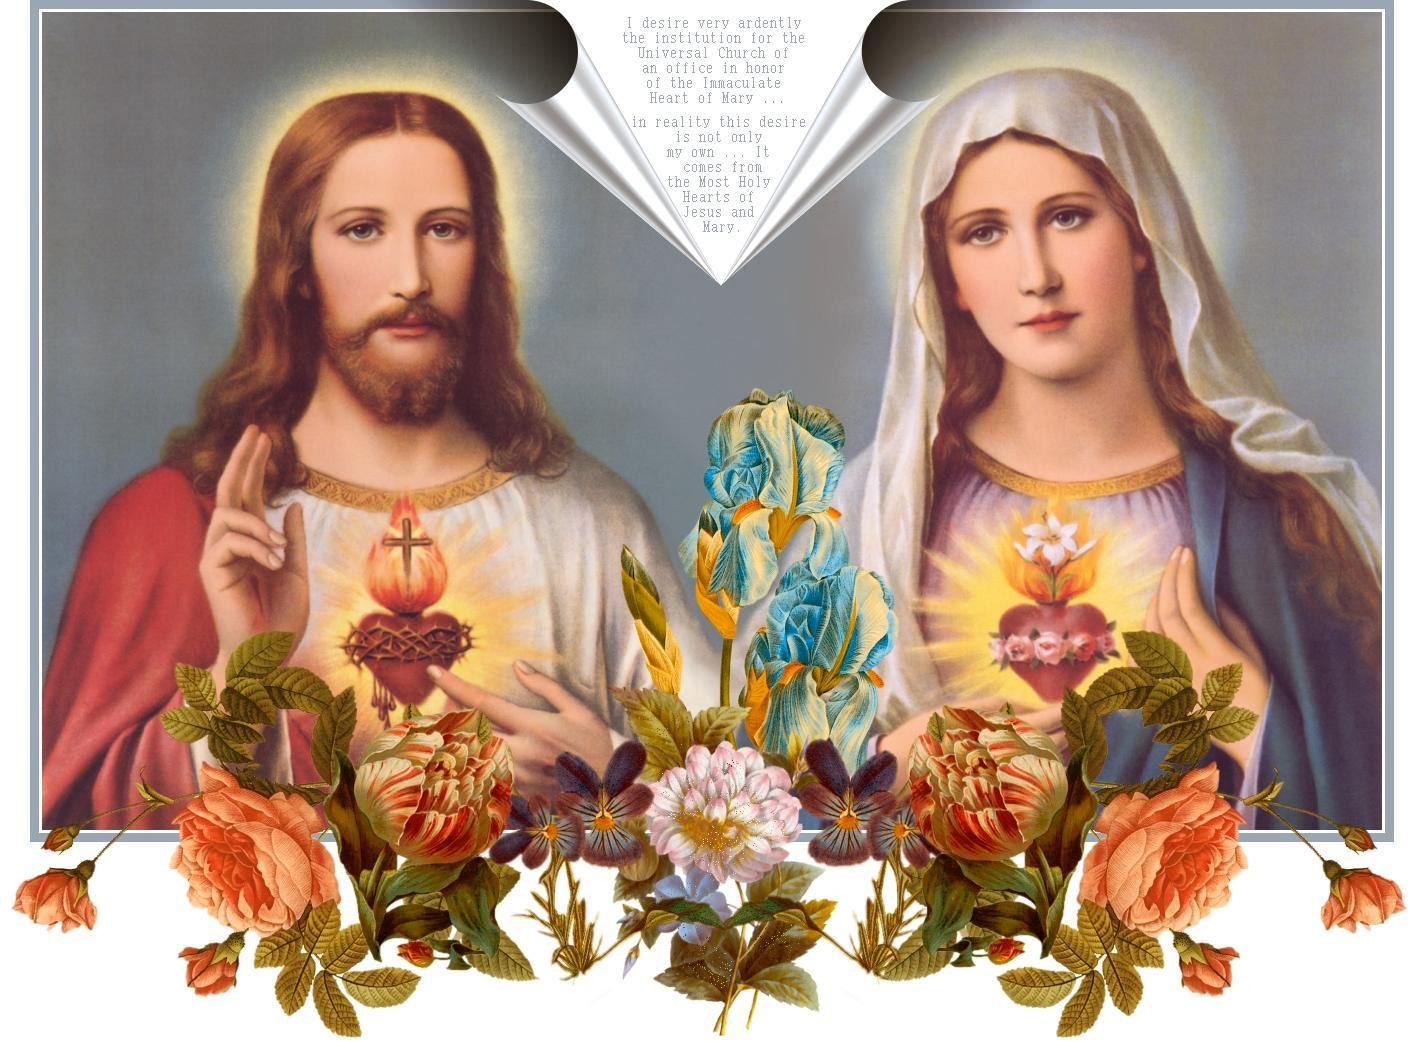 Jesus And Mary Wallpaper (Picture)